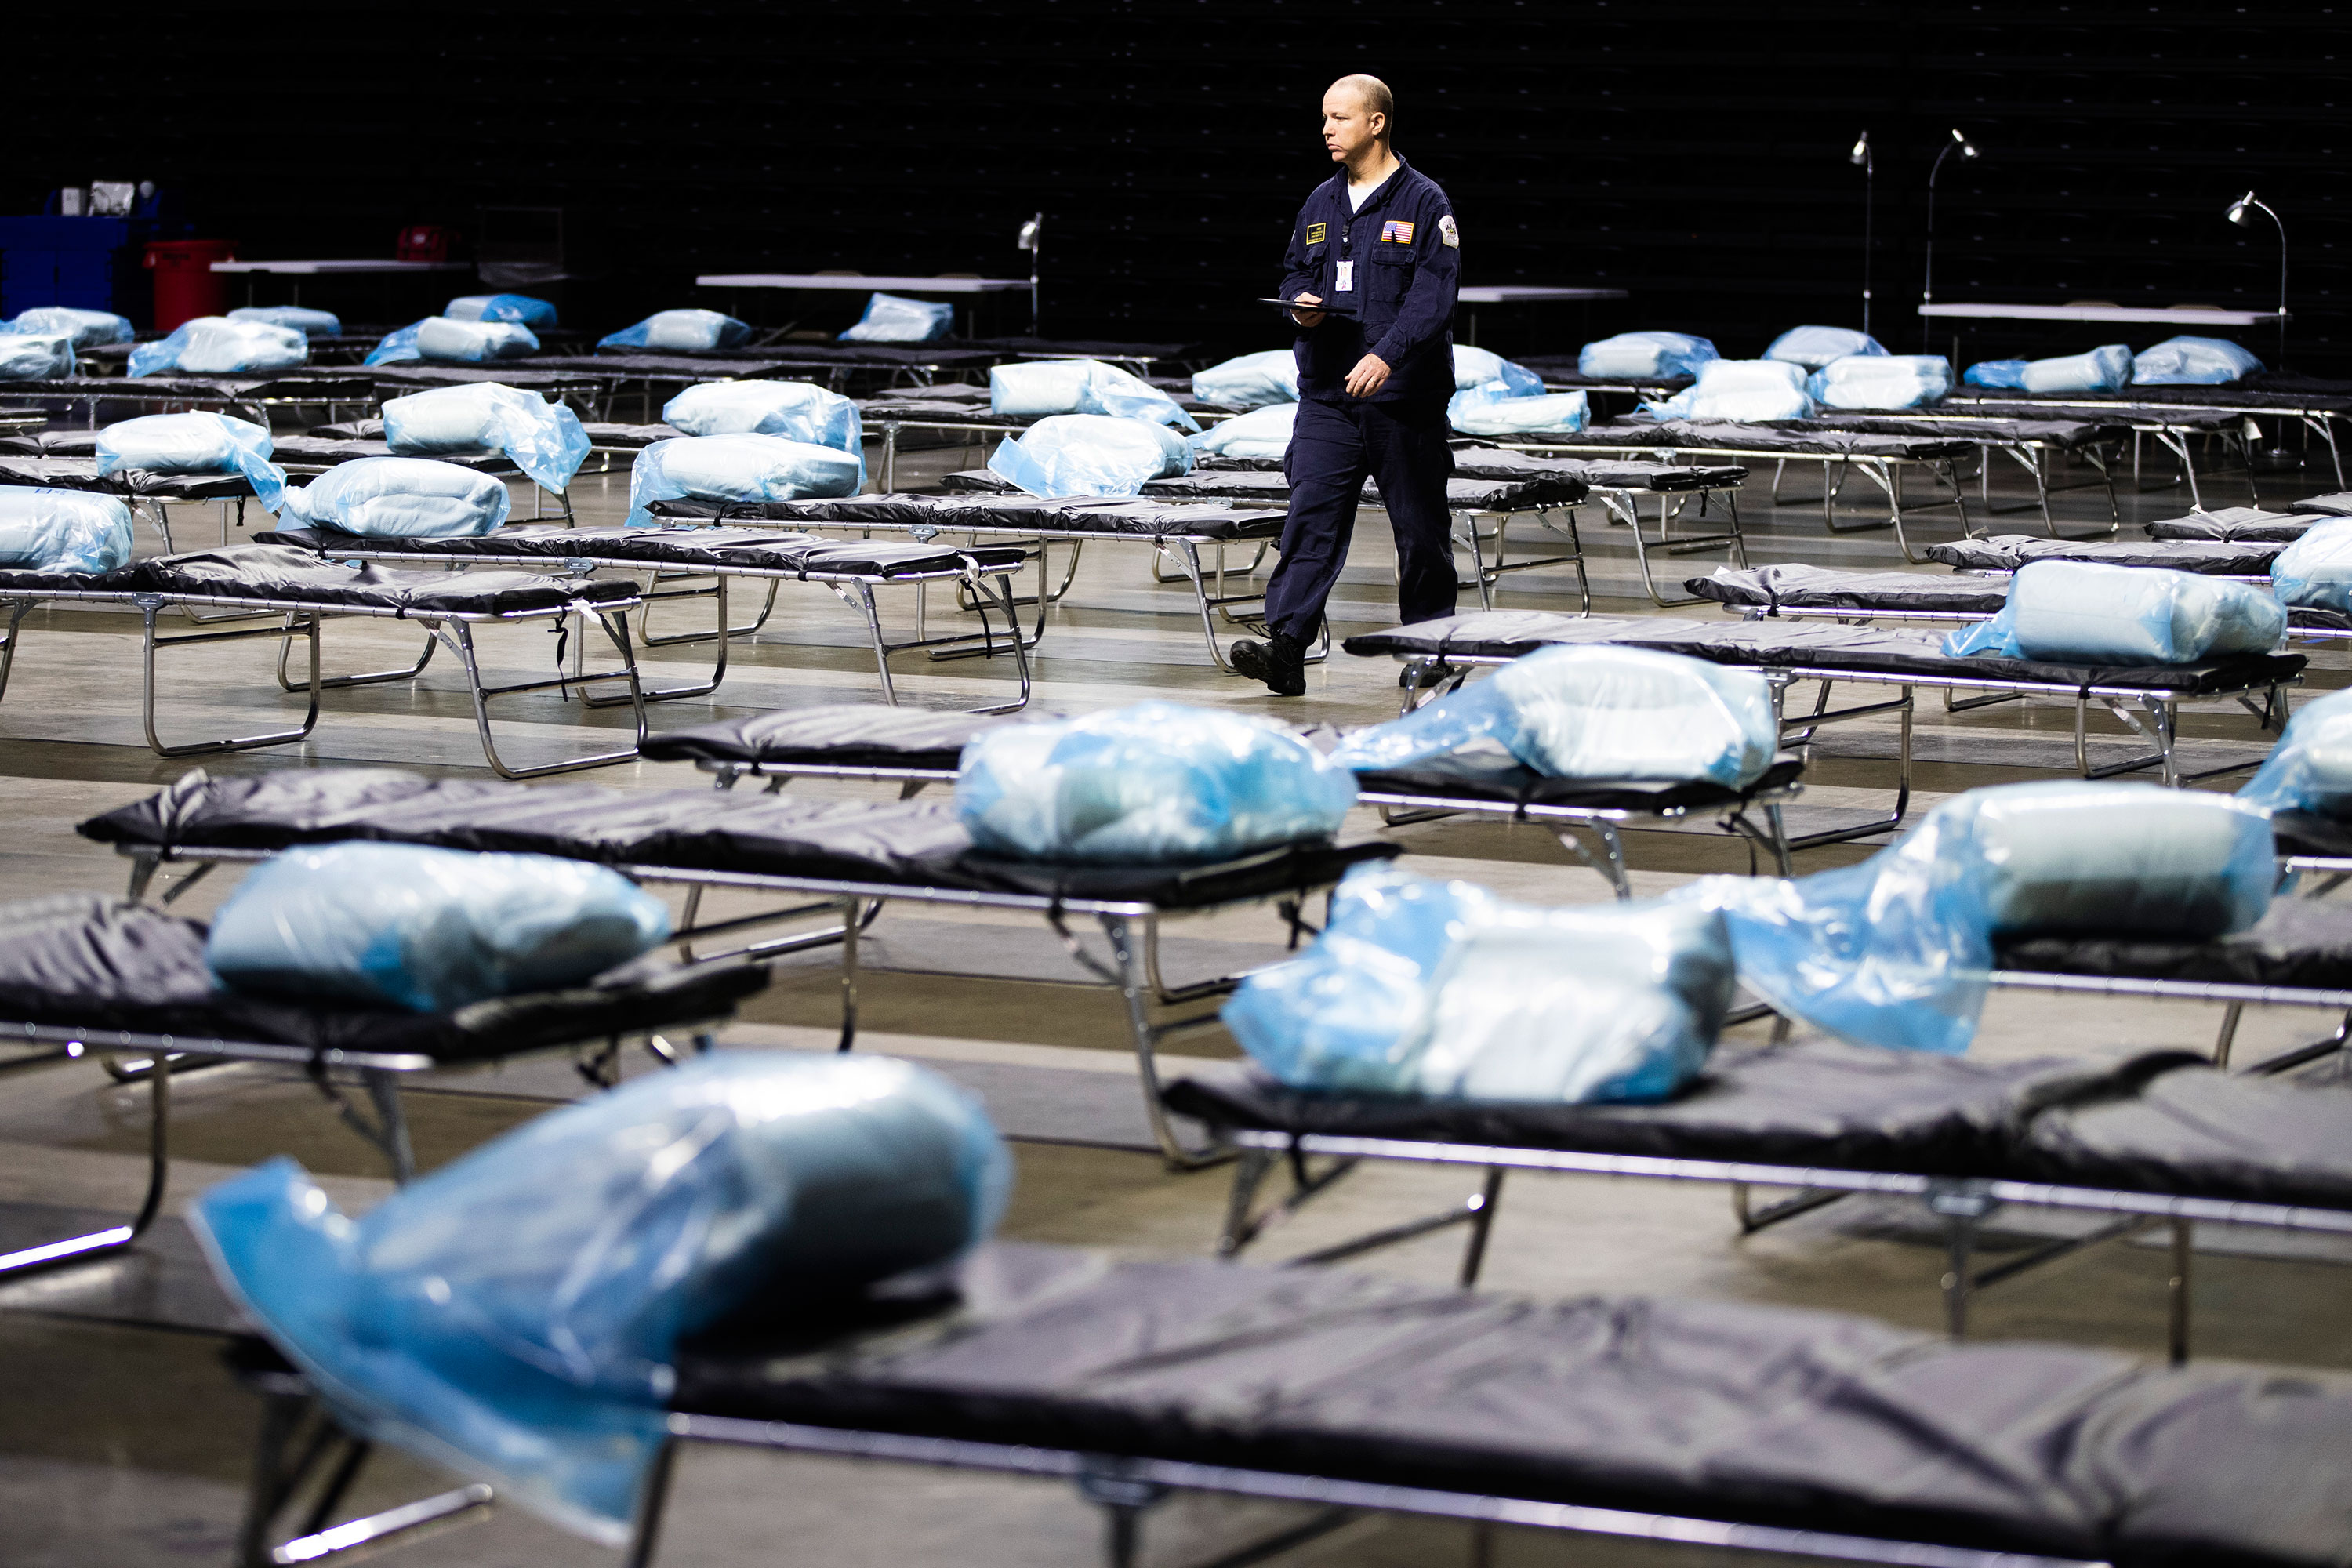 A Pennsylvania Task Force 1 member walks amongst the beds of a temporary hospital for coronavirus patients set up at Temple University in Philadelphia on March 30.